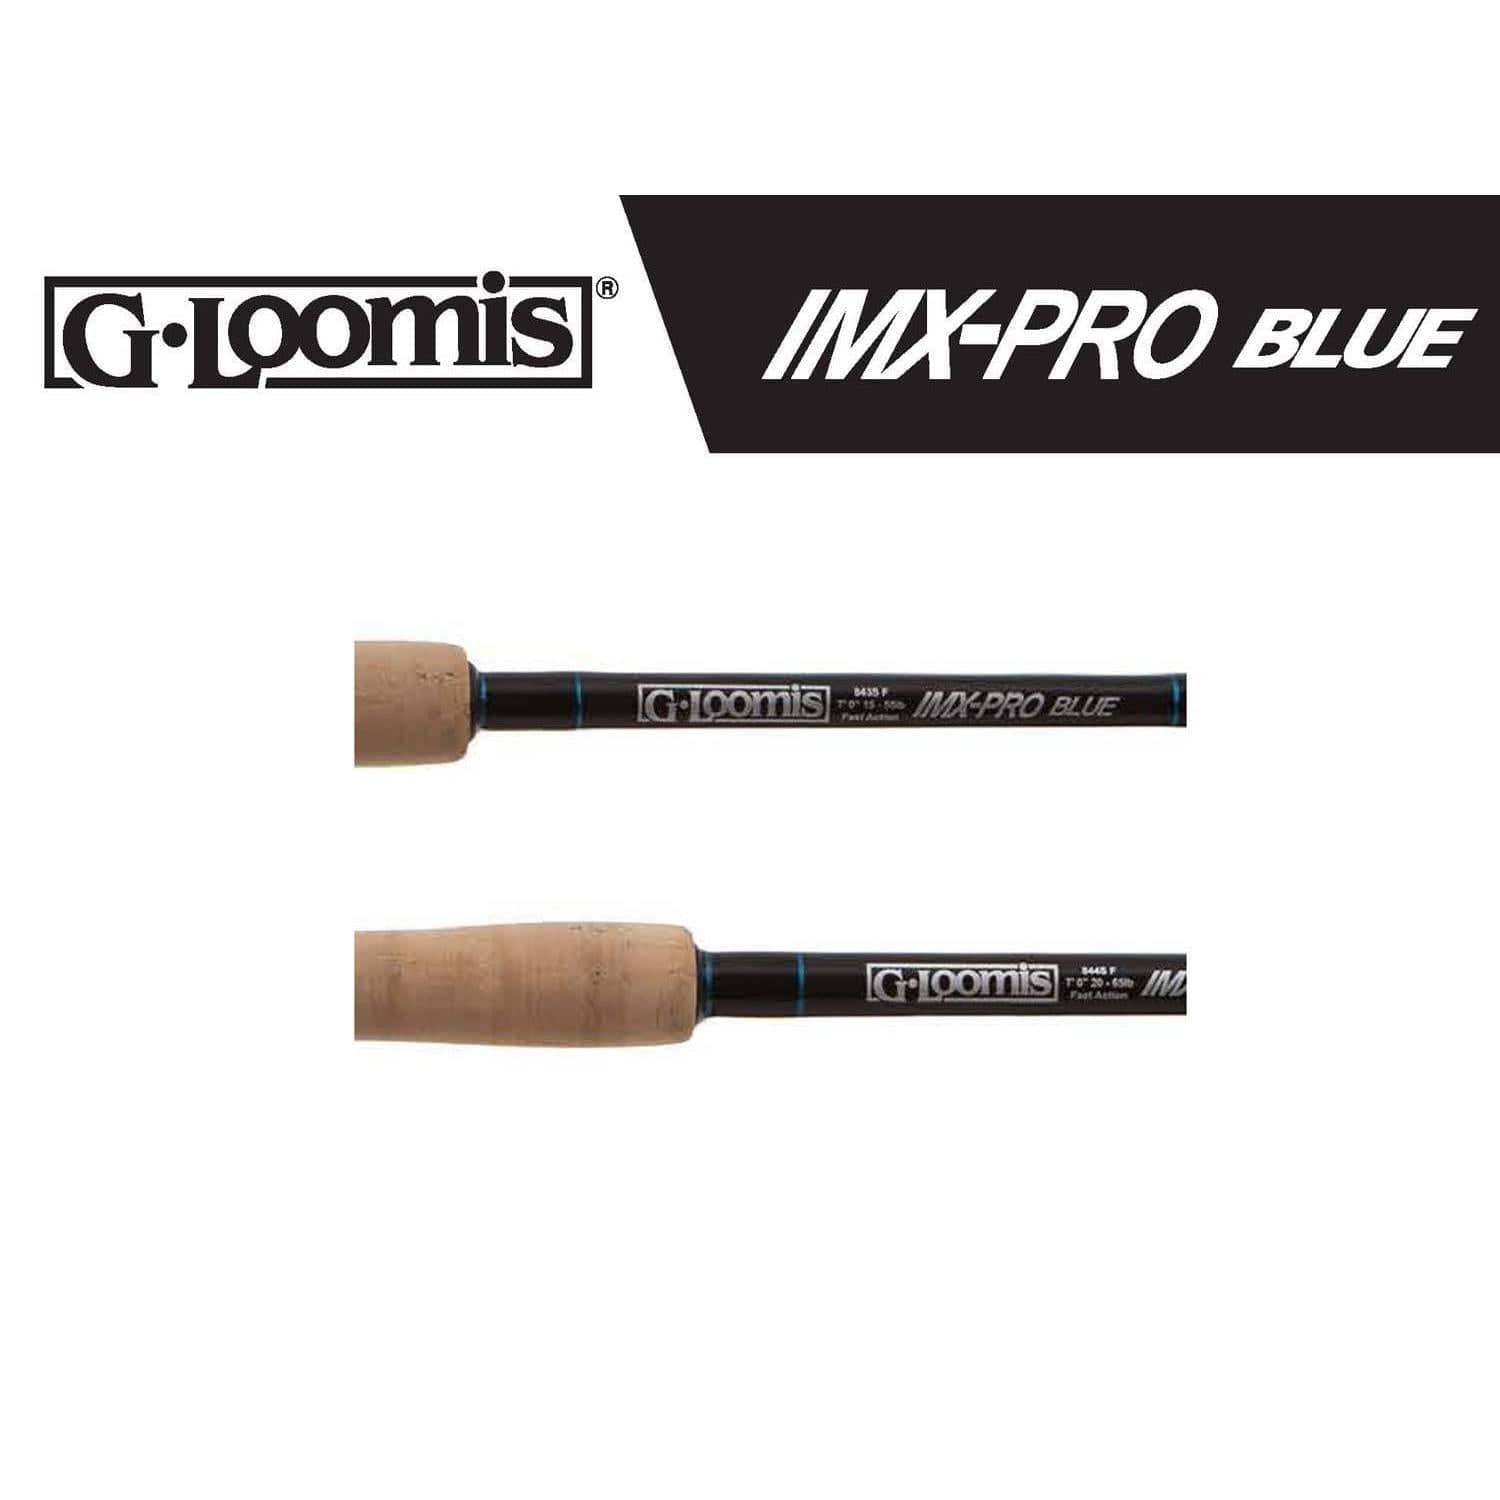 G. Loomis GCX Inshore Spinning Rods - The Saltwater Edge